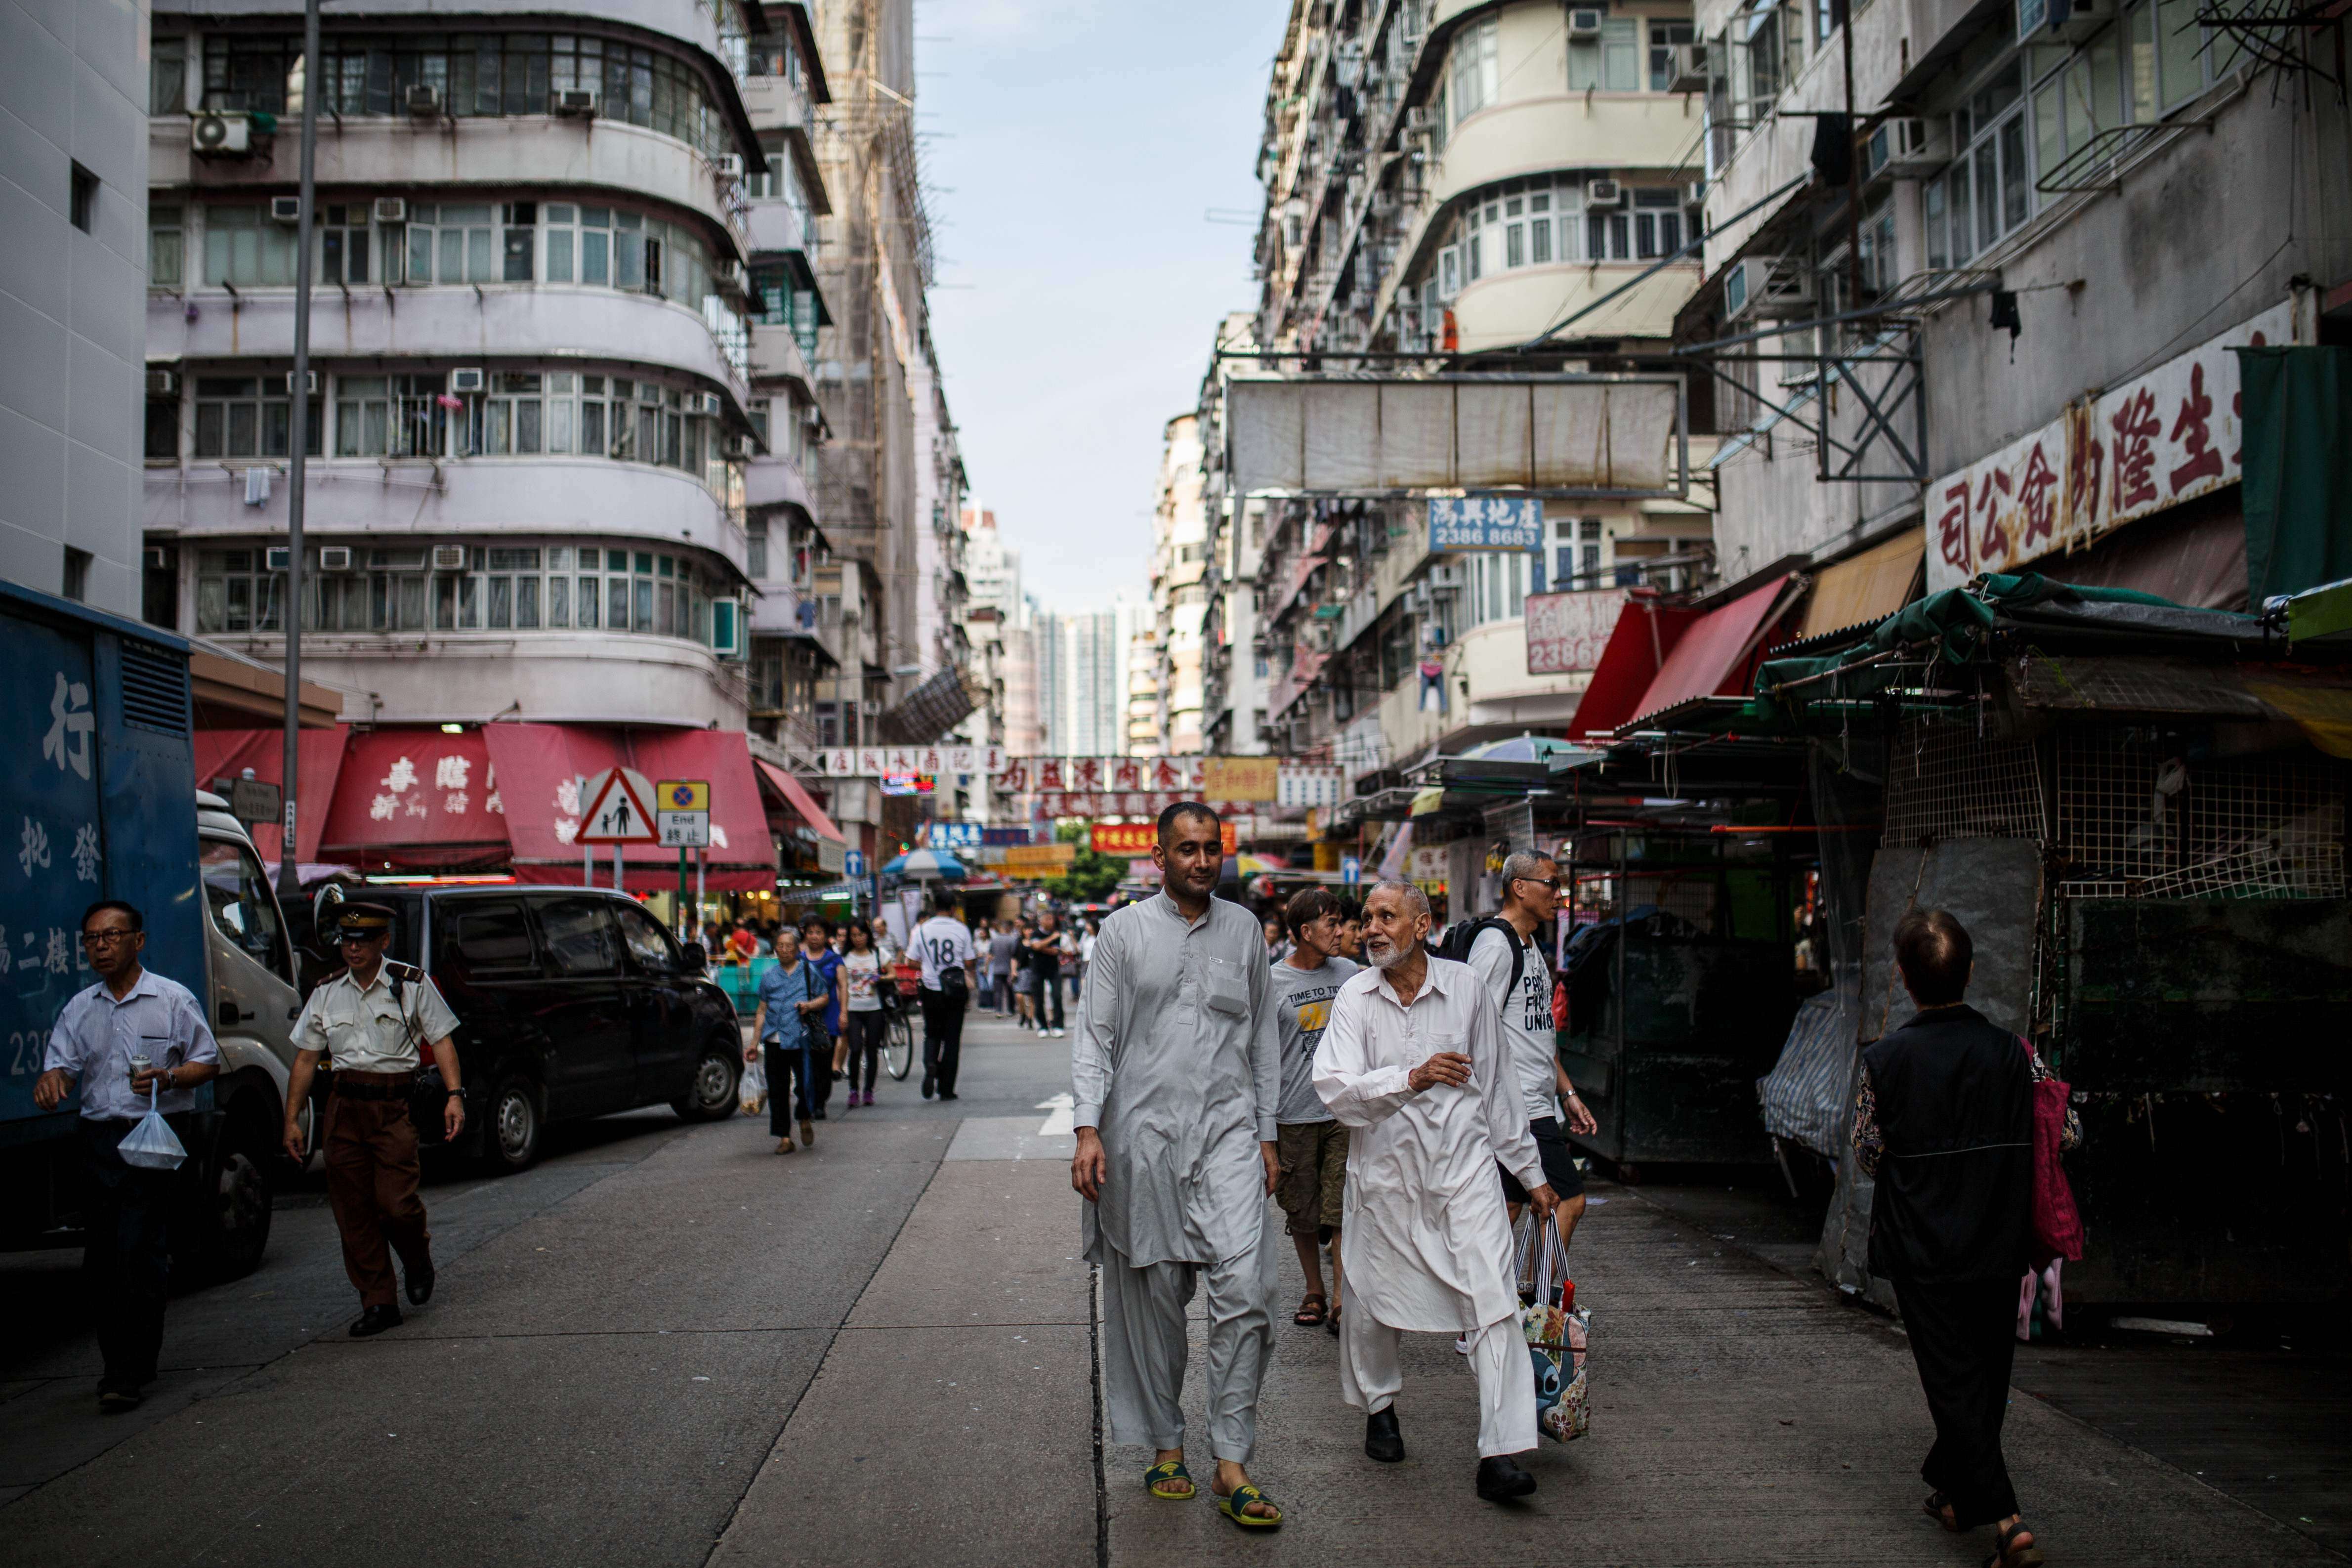 Pedestrians walk along a road in Kowloon. Hong Kong’s geographic position on the edge of China and at the centre of Asia is the result of strategic design. Photo: AFP